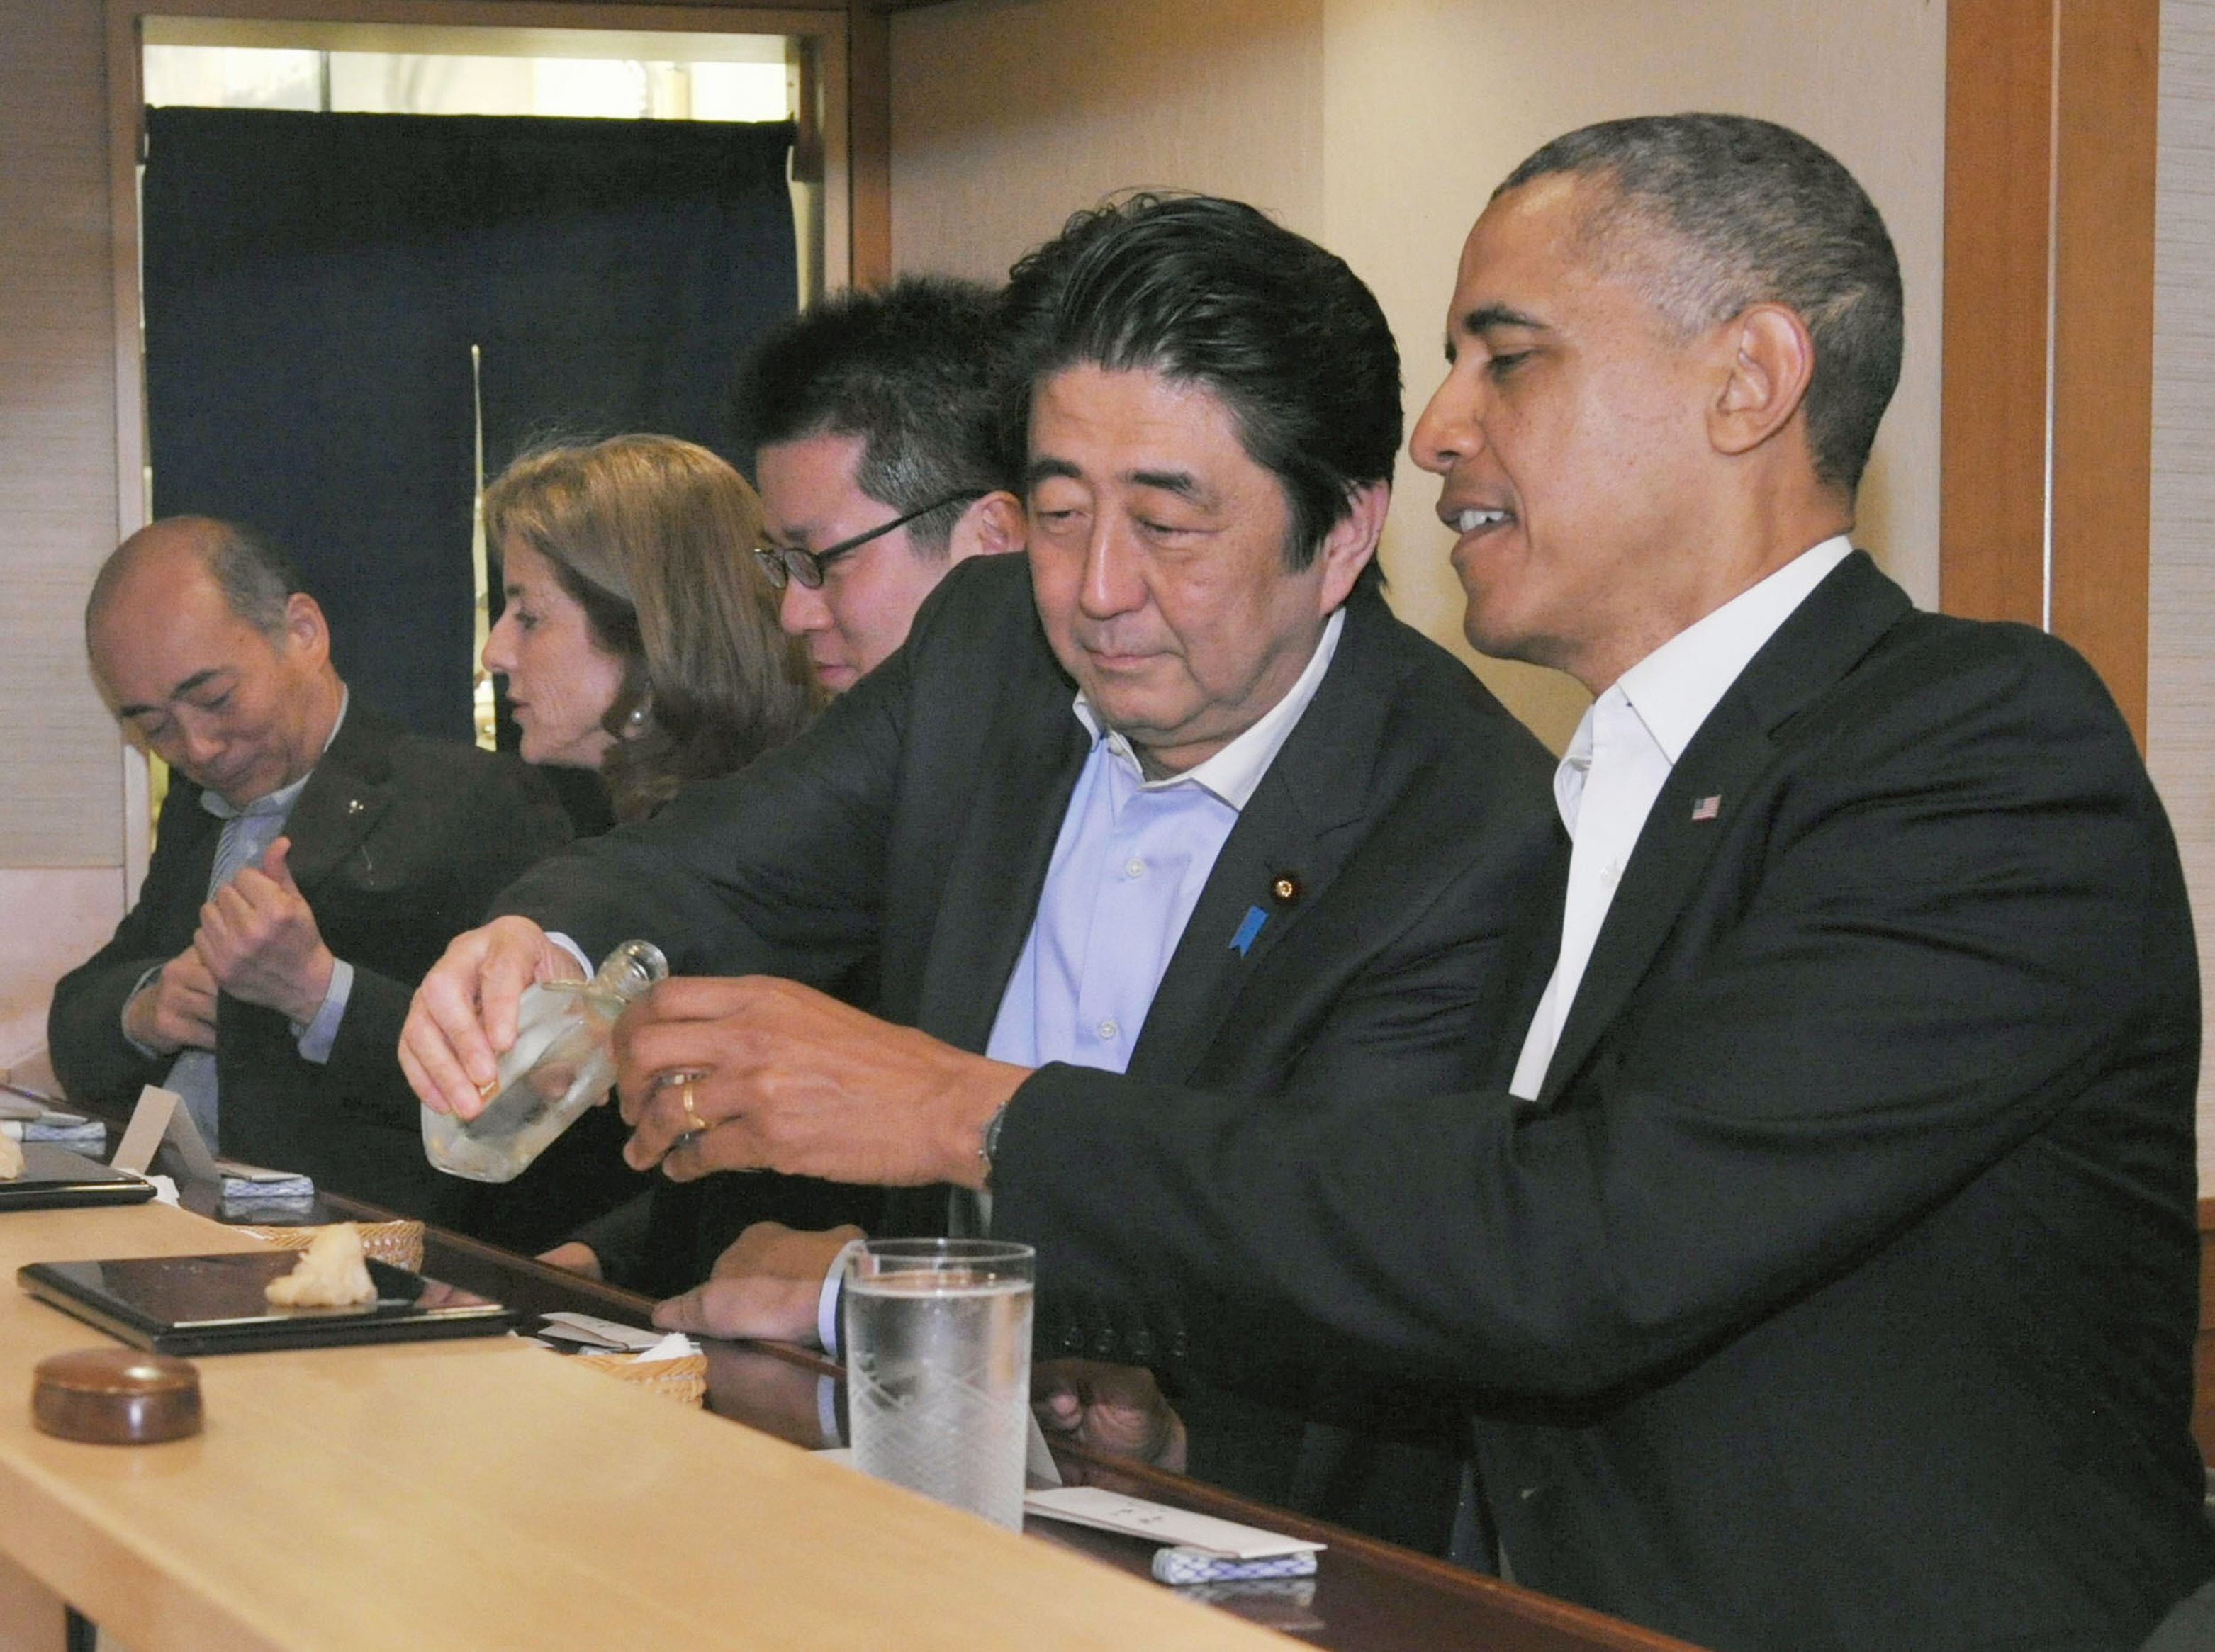 From left: Japan's Prime Minister Shizo Abe fills the glass of U.S. President Barak Obama during a dinner at Sukiyabashi Jiro sushi restaurant in Tokyo's Ginza district on April 23, 2014. (Japan's Cabinet Public Relations Office/Kyodo/Reuters)